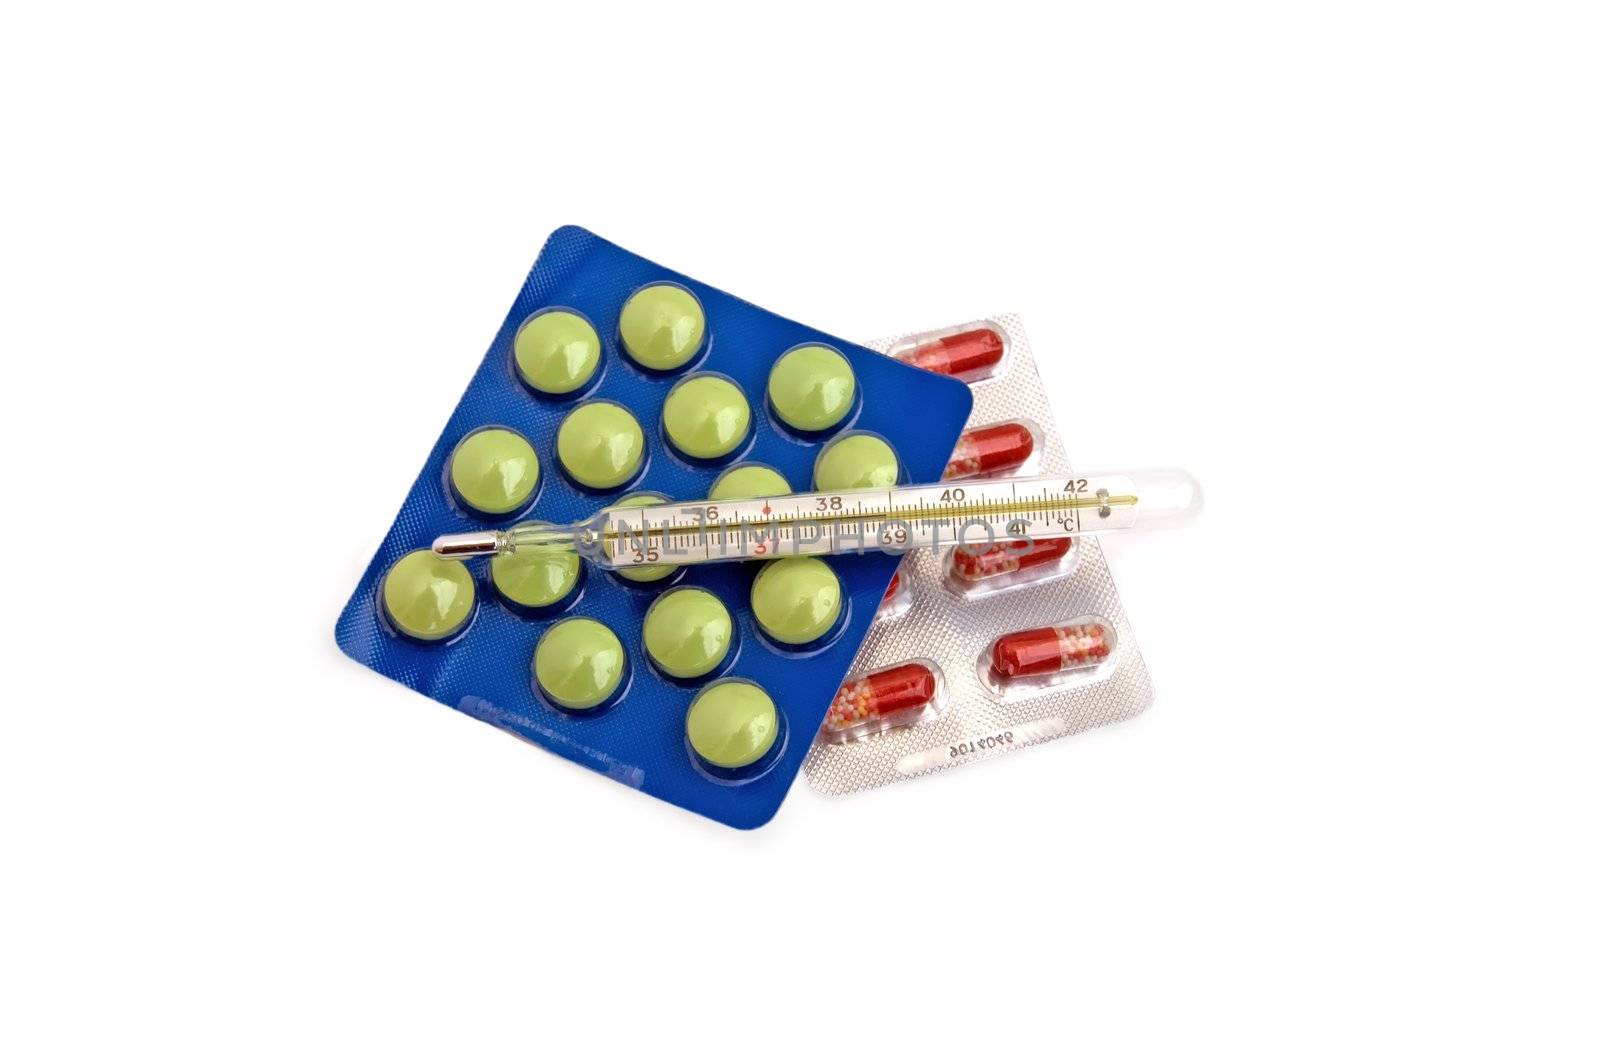 Thermometer with multi-colored pills and capsules in the package on a white background